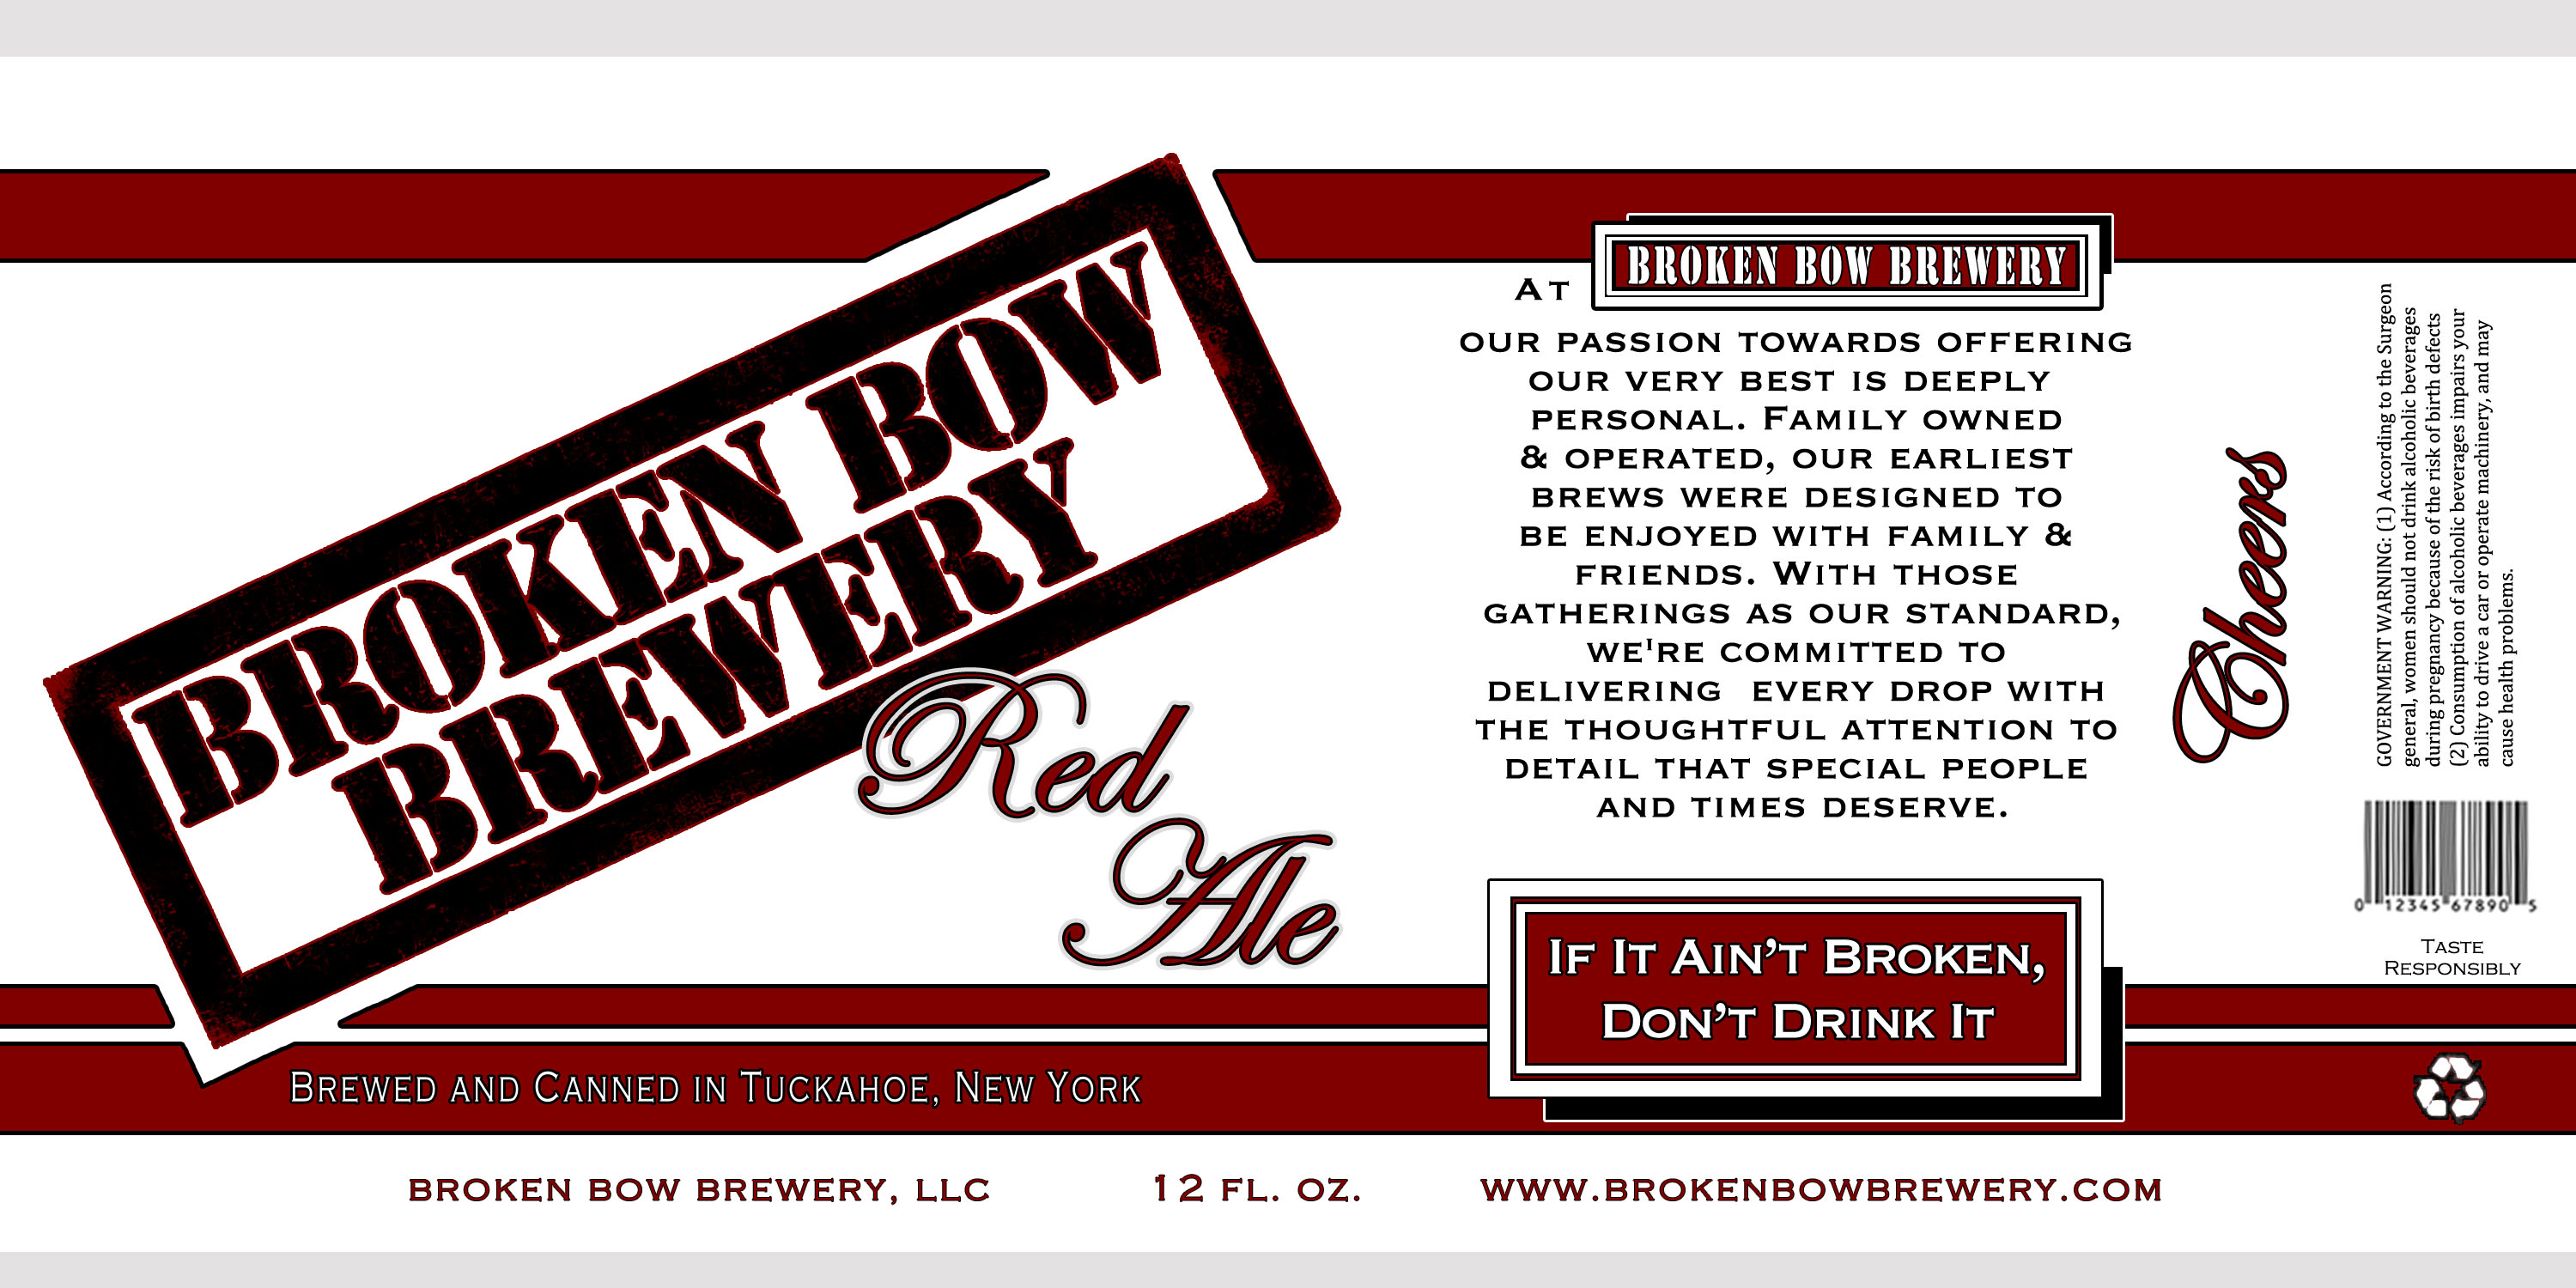 Broken Bow Brewery Red Ale